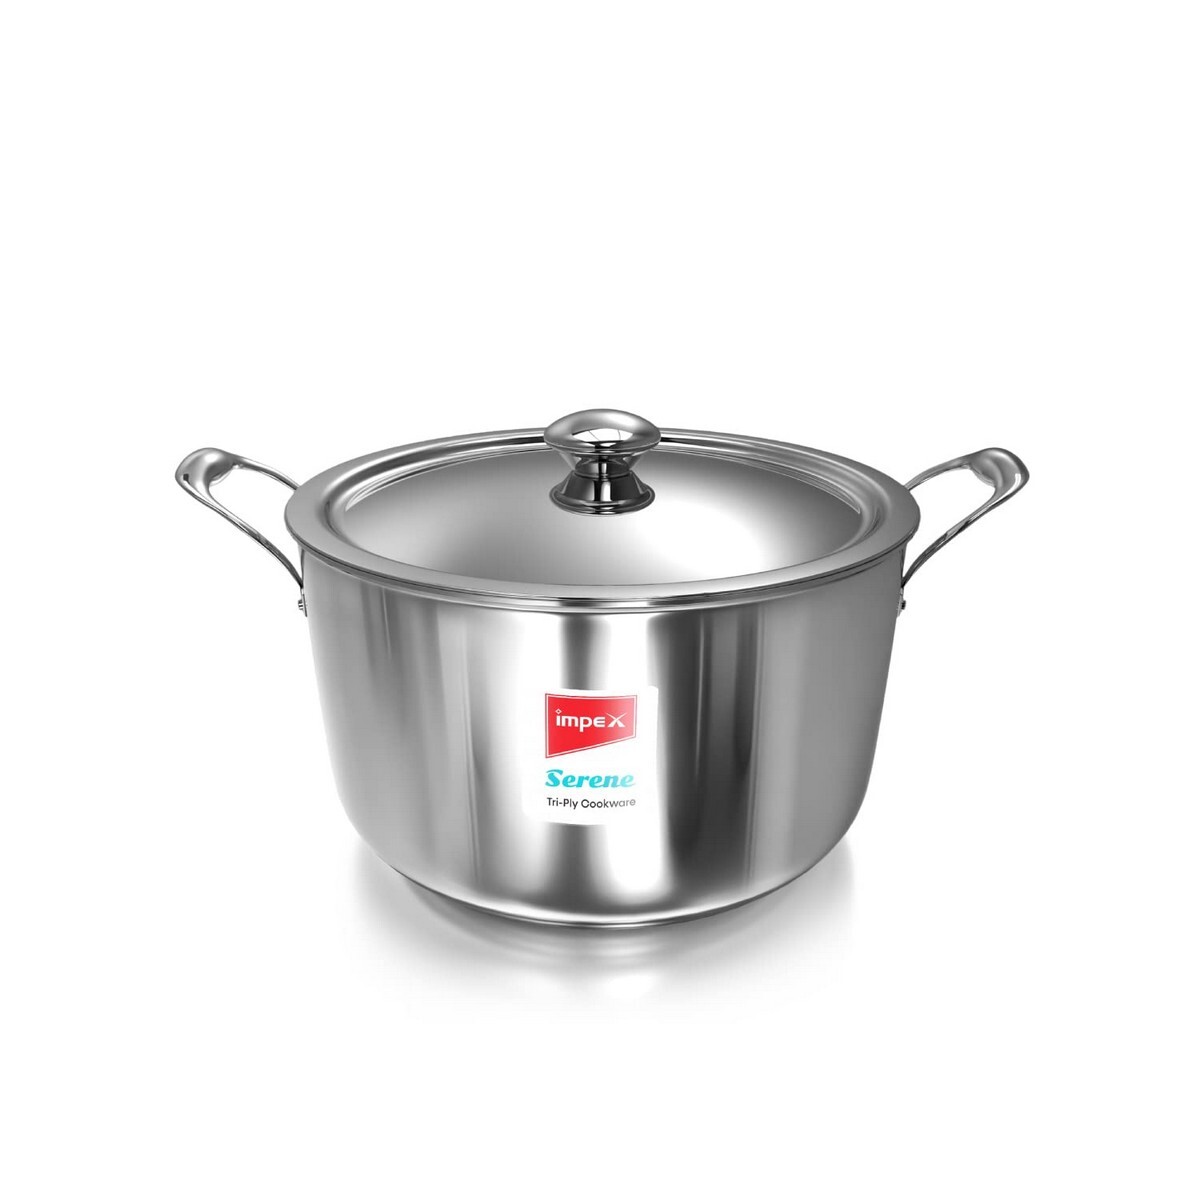 Impex StainlessSteel Tri-Ply Saucepan20cm with lid Seren TSP20